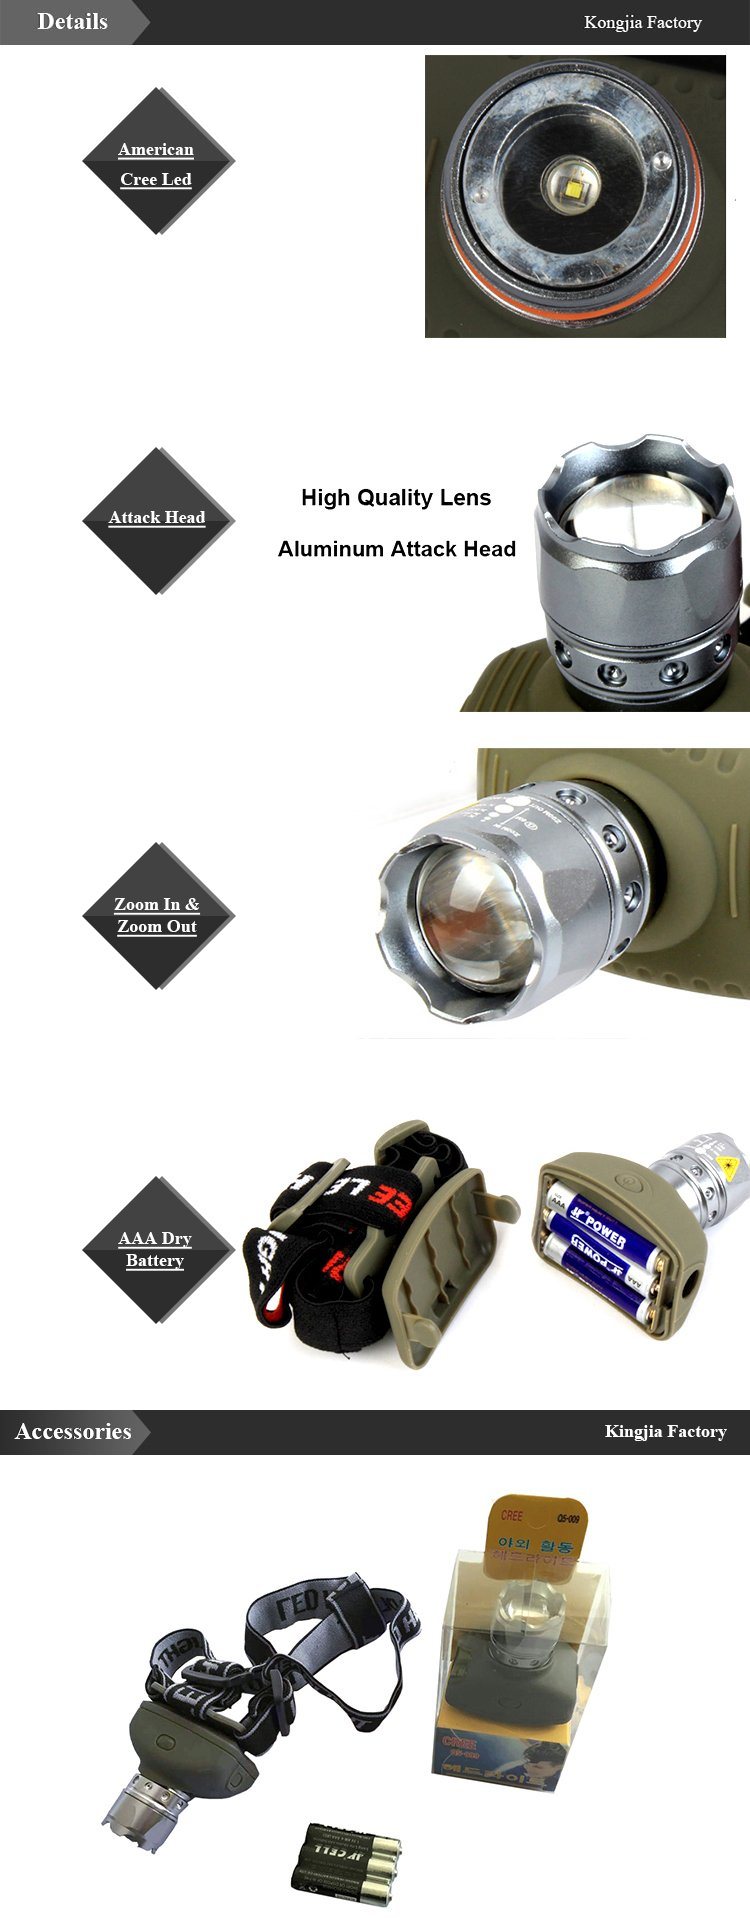 3W Zoomable Super Bright Light and Handy Rechargeable LED Headlamp